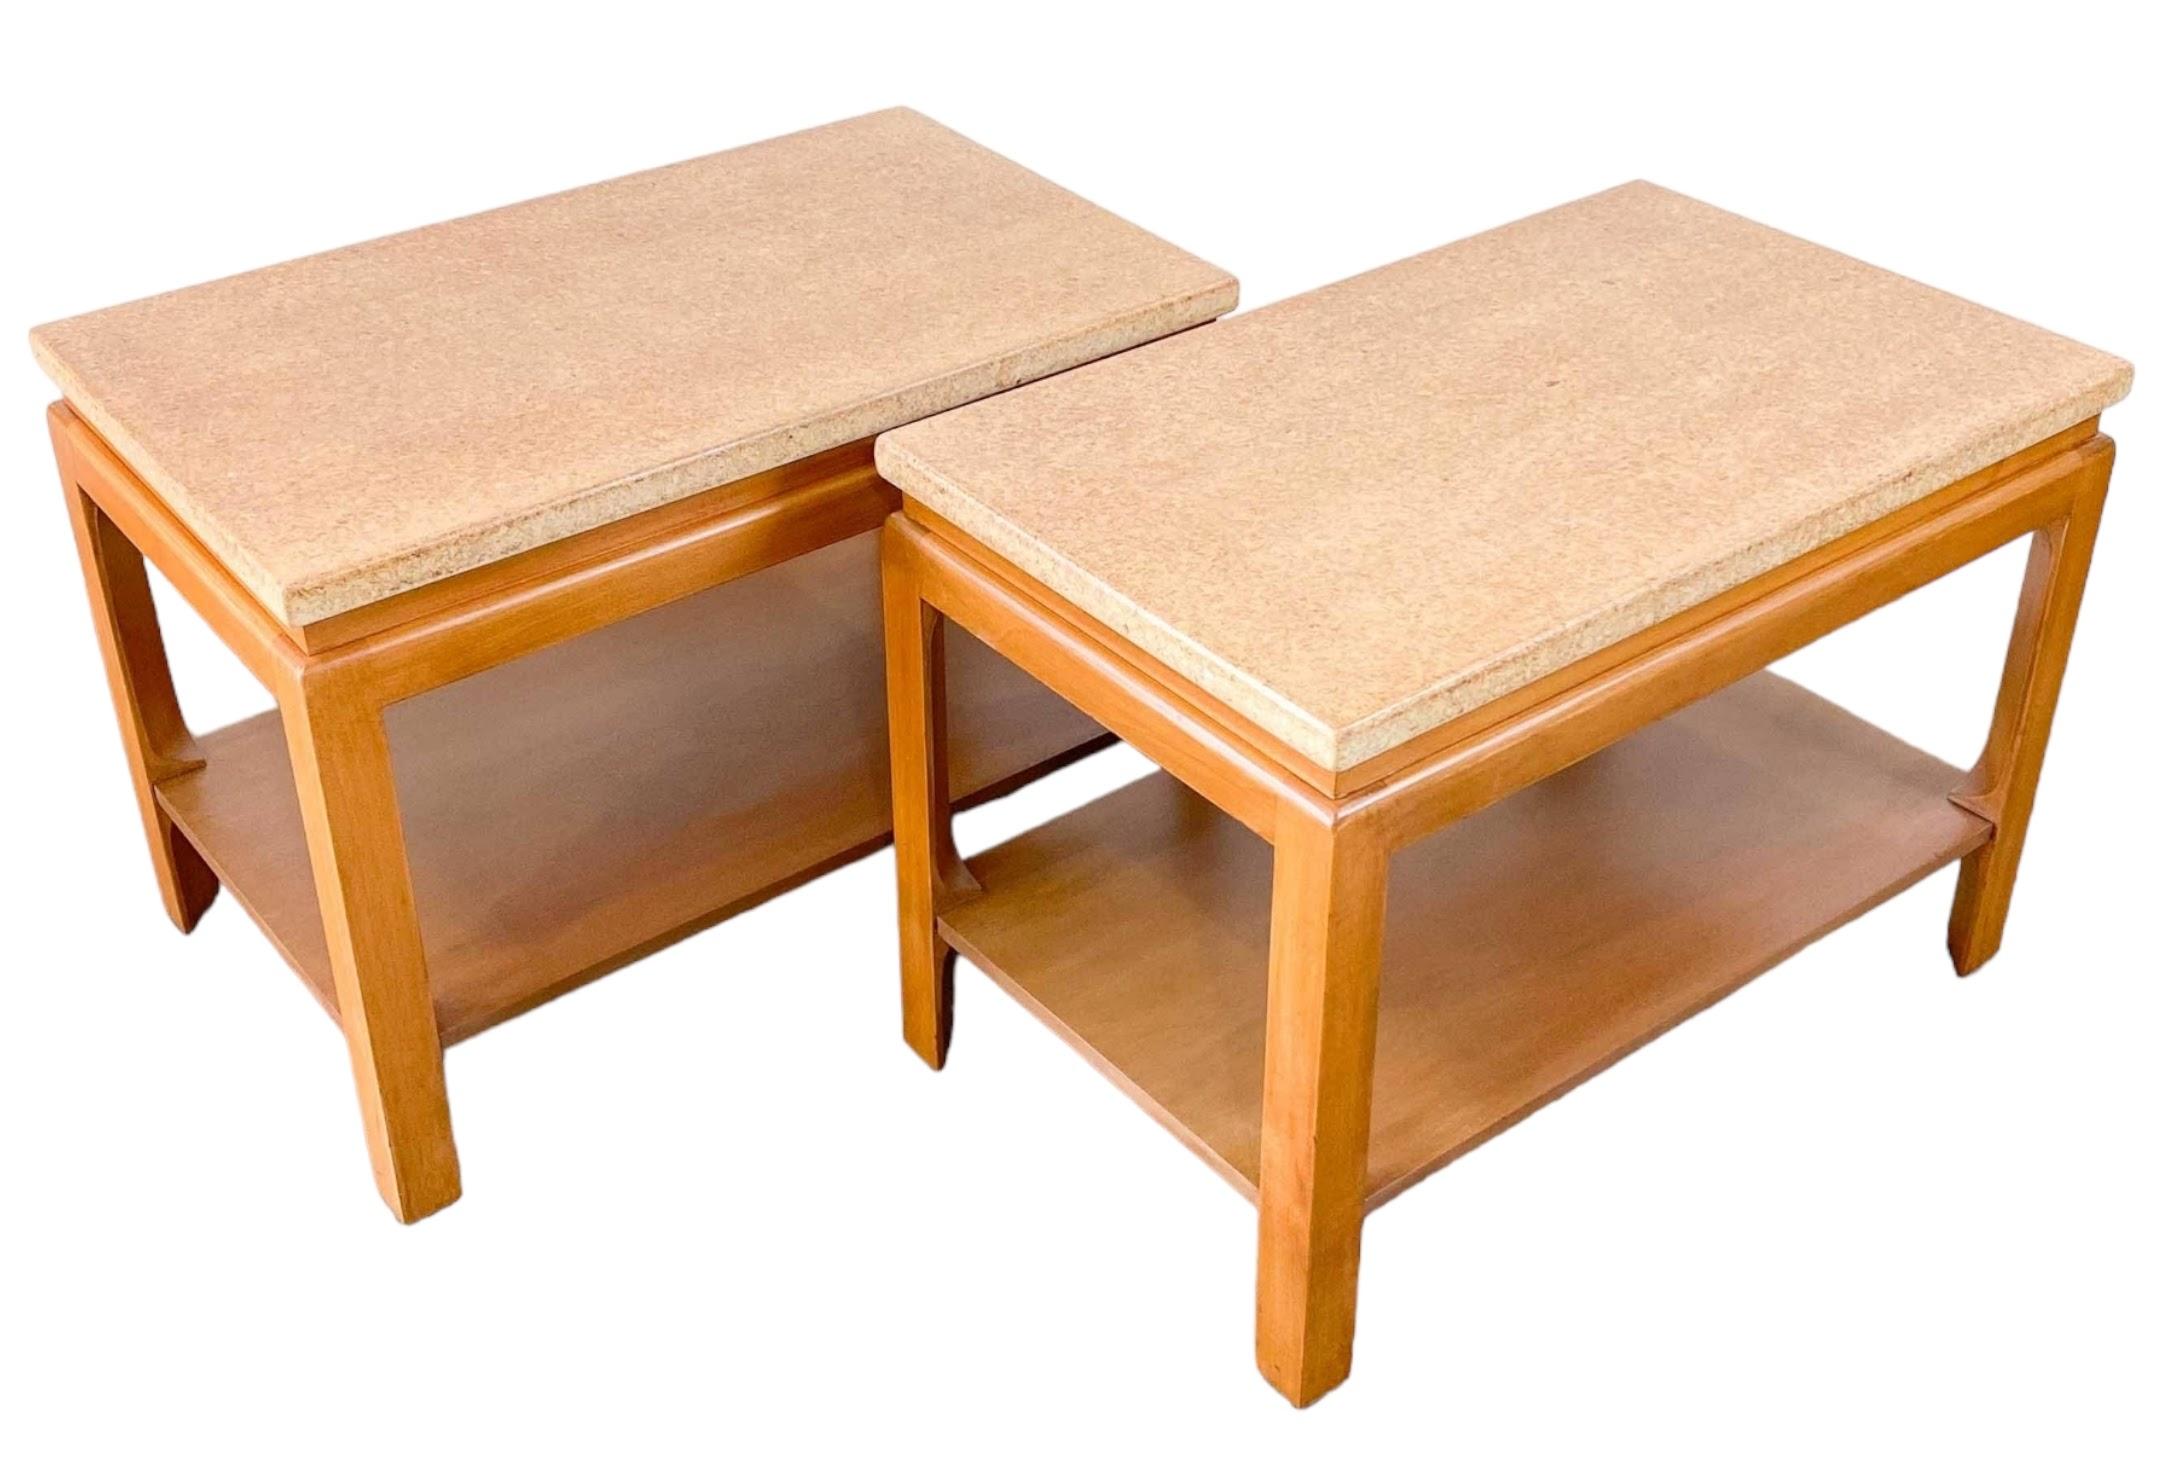 Pair of Paul T. Frankl for Johnson Cork Top Two Tier Side or End Tables, 1950s For Sale 2